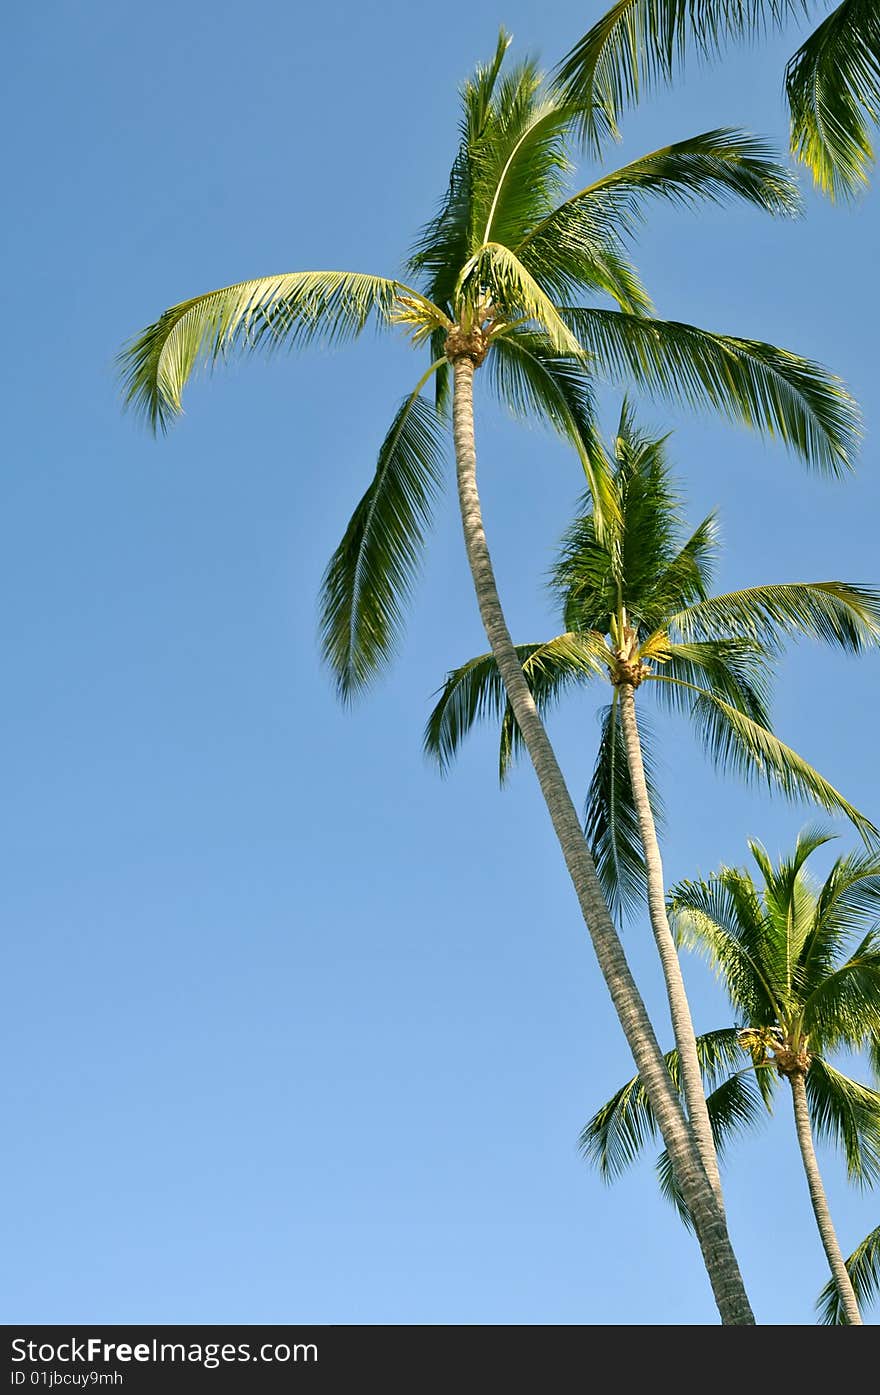 Group of palm trees against the sky on the coast of Mexico